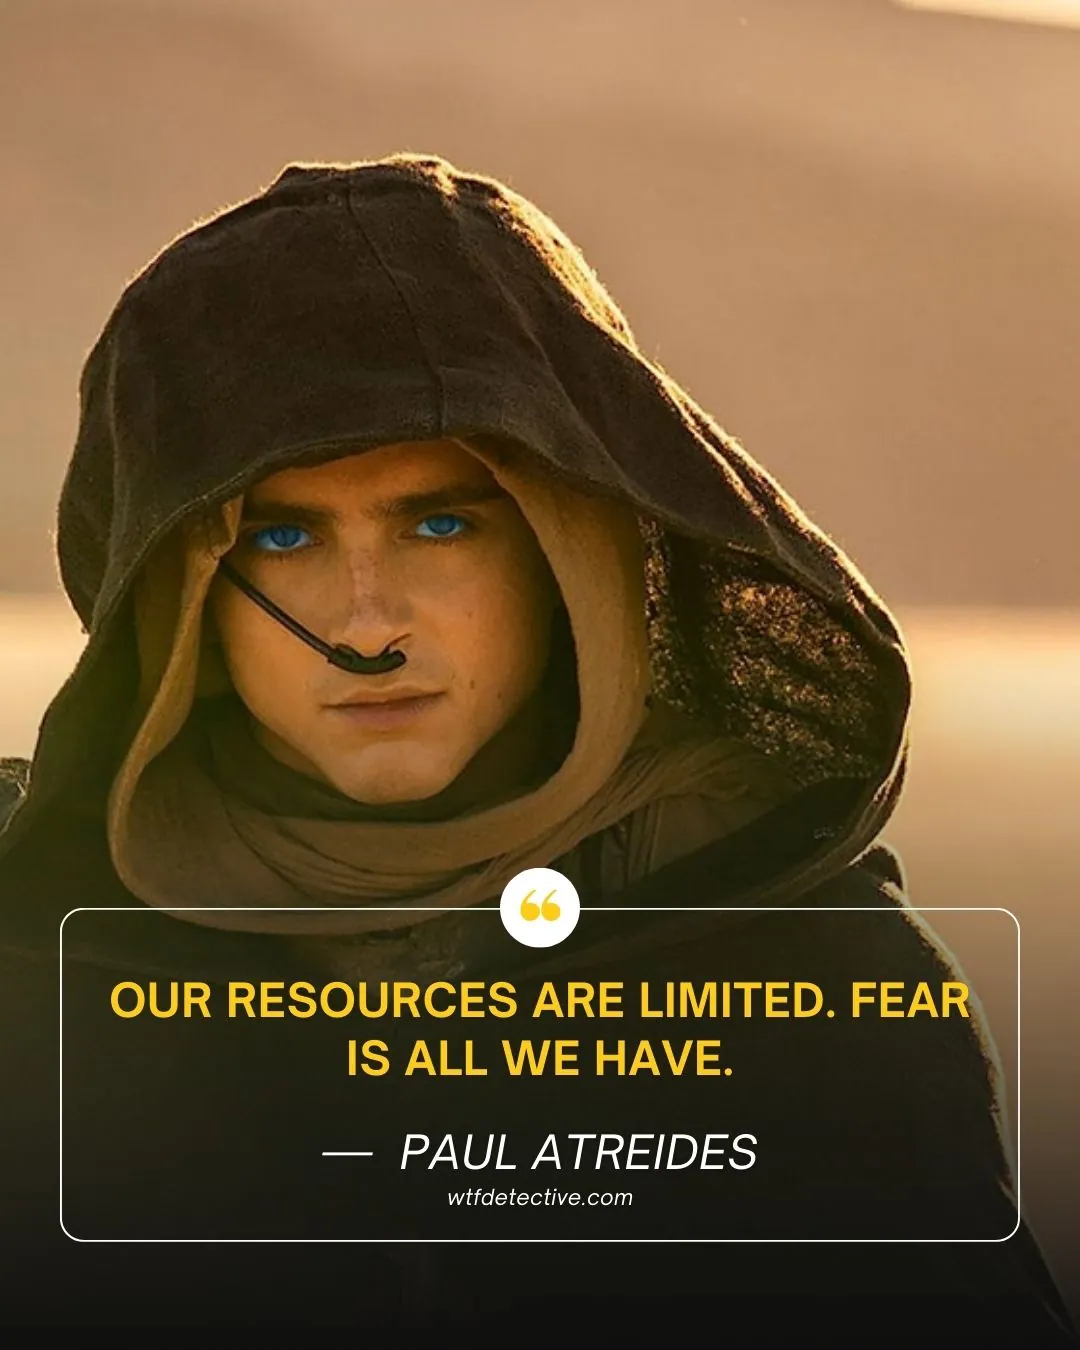 Our resources are limited quotes. Fear is all we have quote.

paul atreides quotes, timothee in dune 2 quotes, dune part 2 sayings